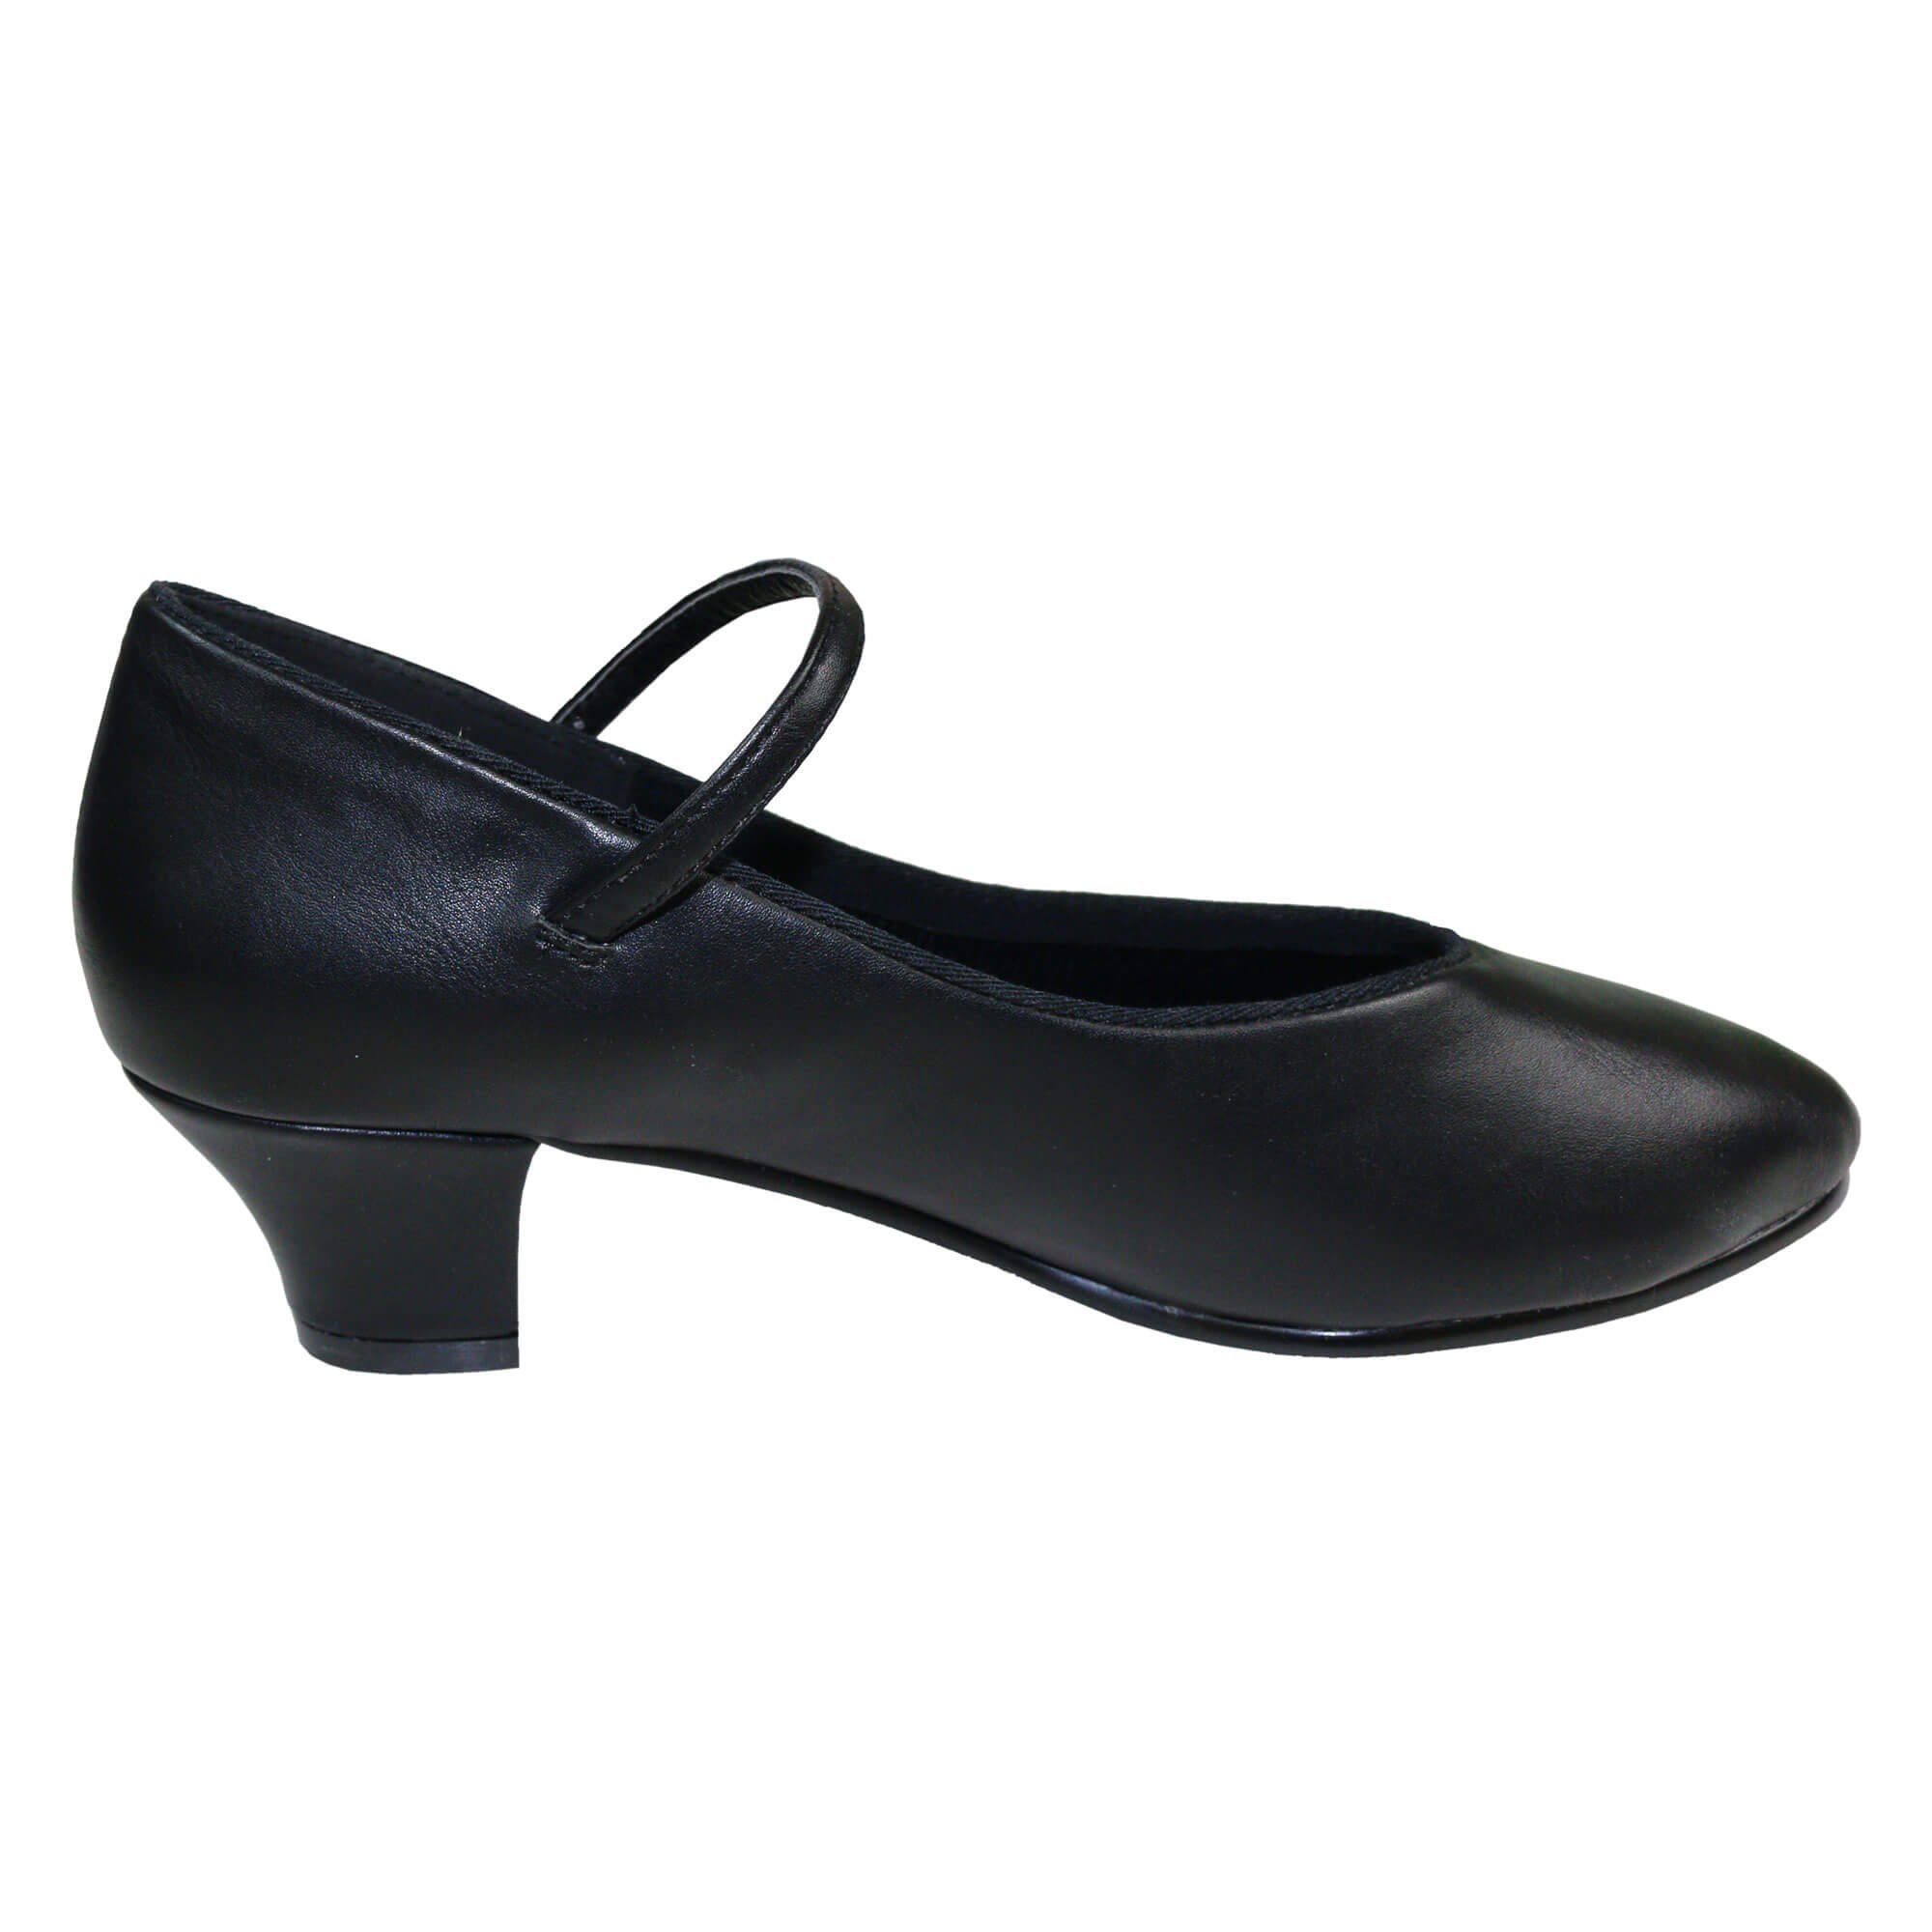 Danzcue 1.5" Character Dance Shoes - Click Image to Close